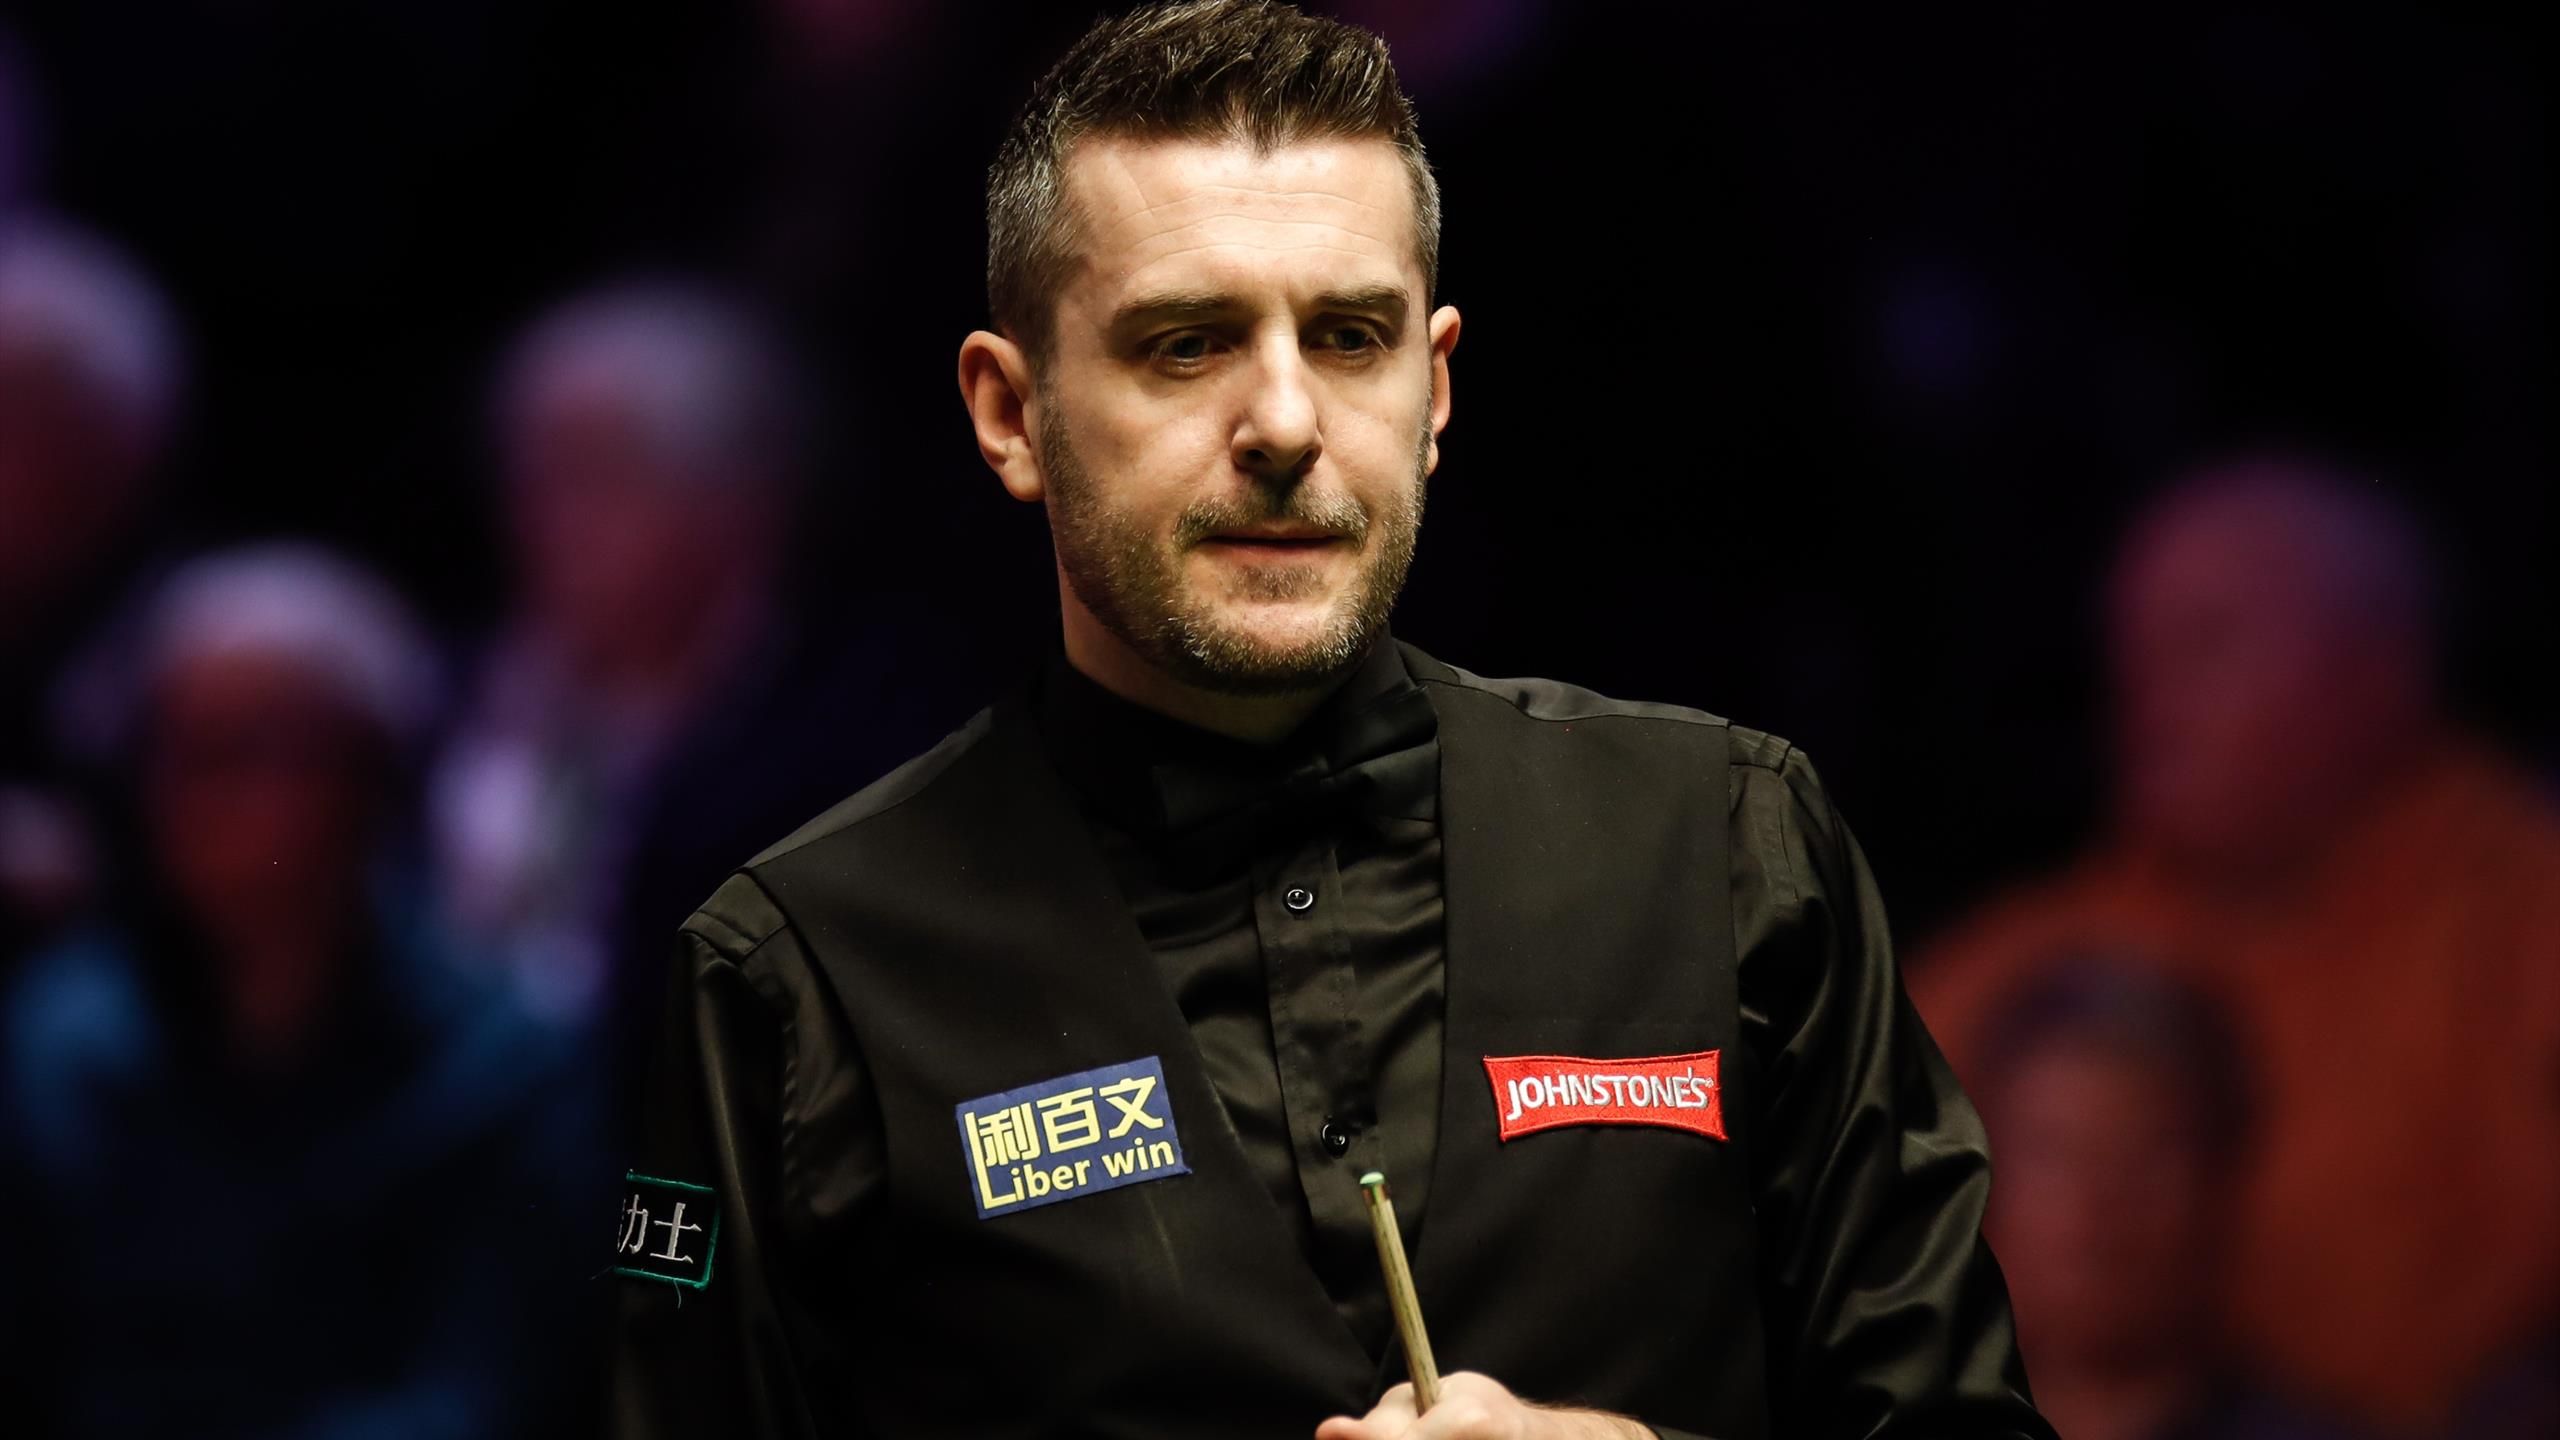 Mark Selby cautious of tough first-round matches at the Crucible as top players compete in World Championship qualifiers